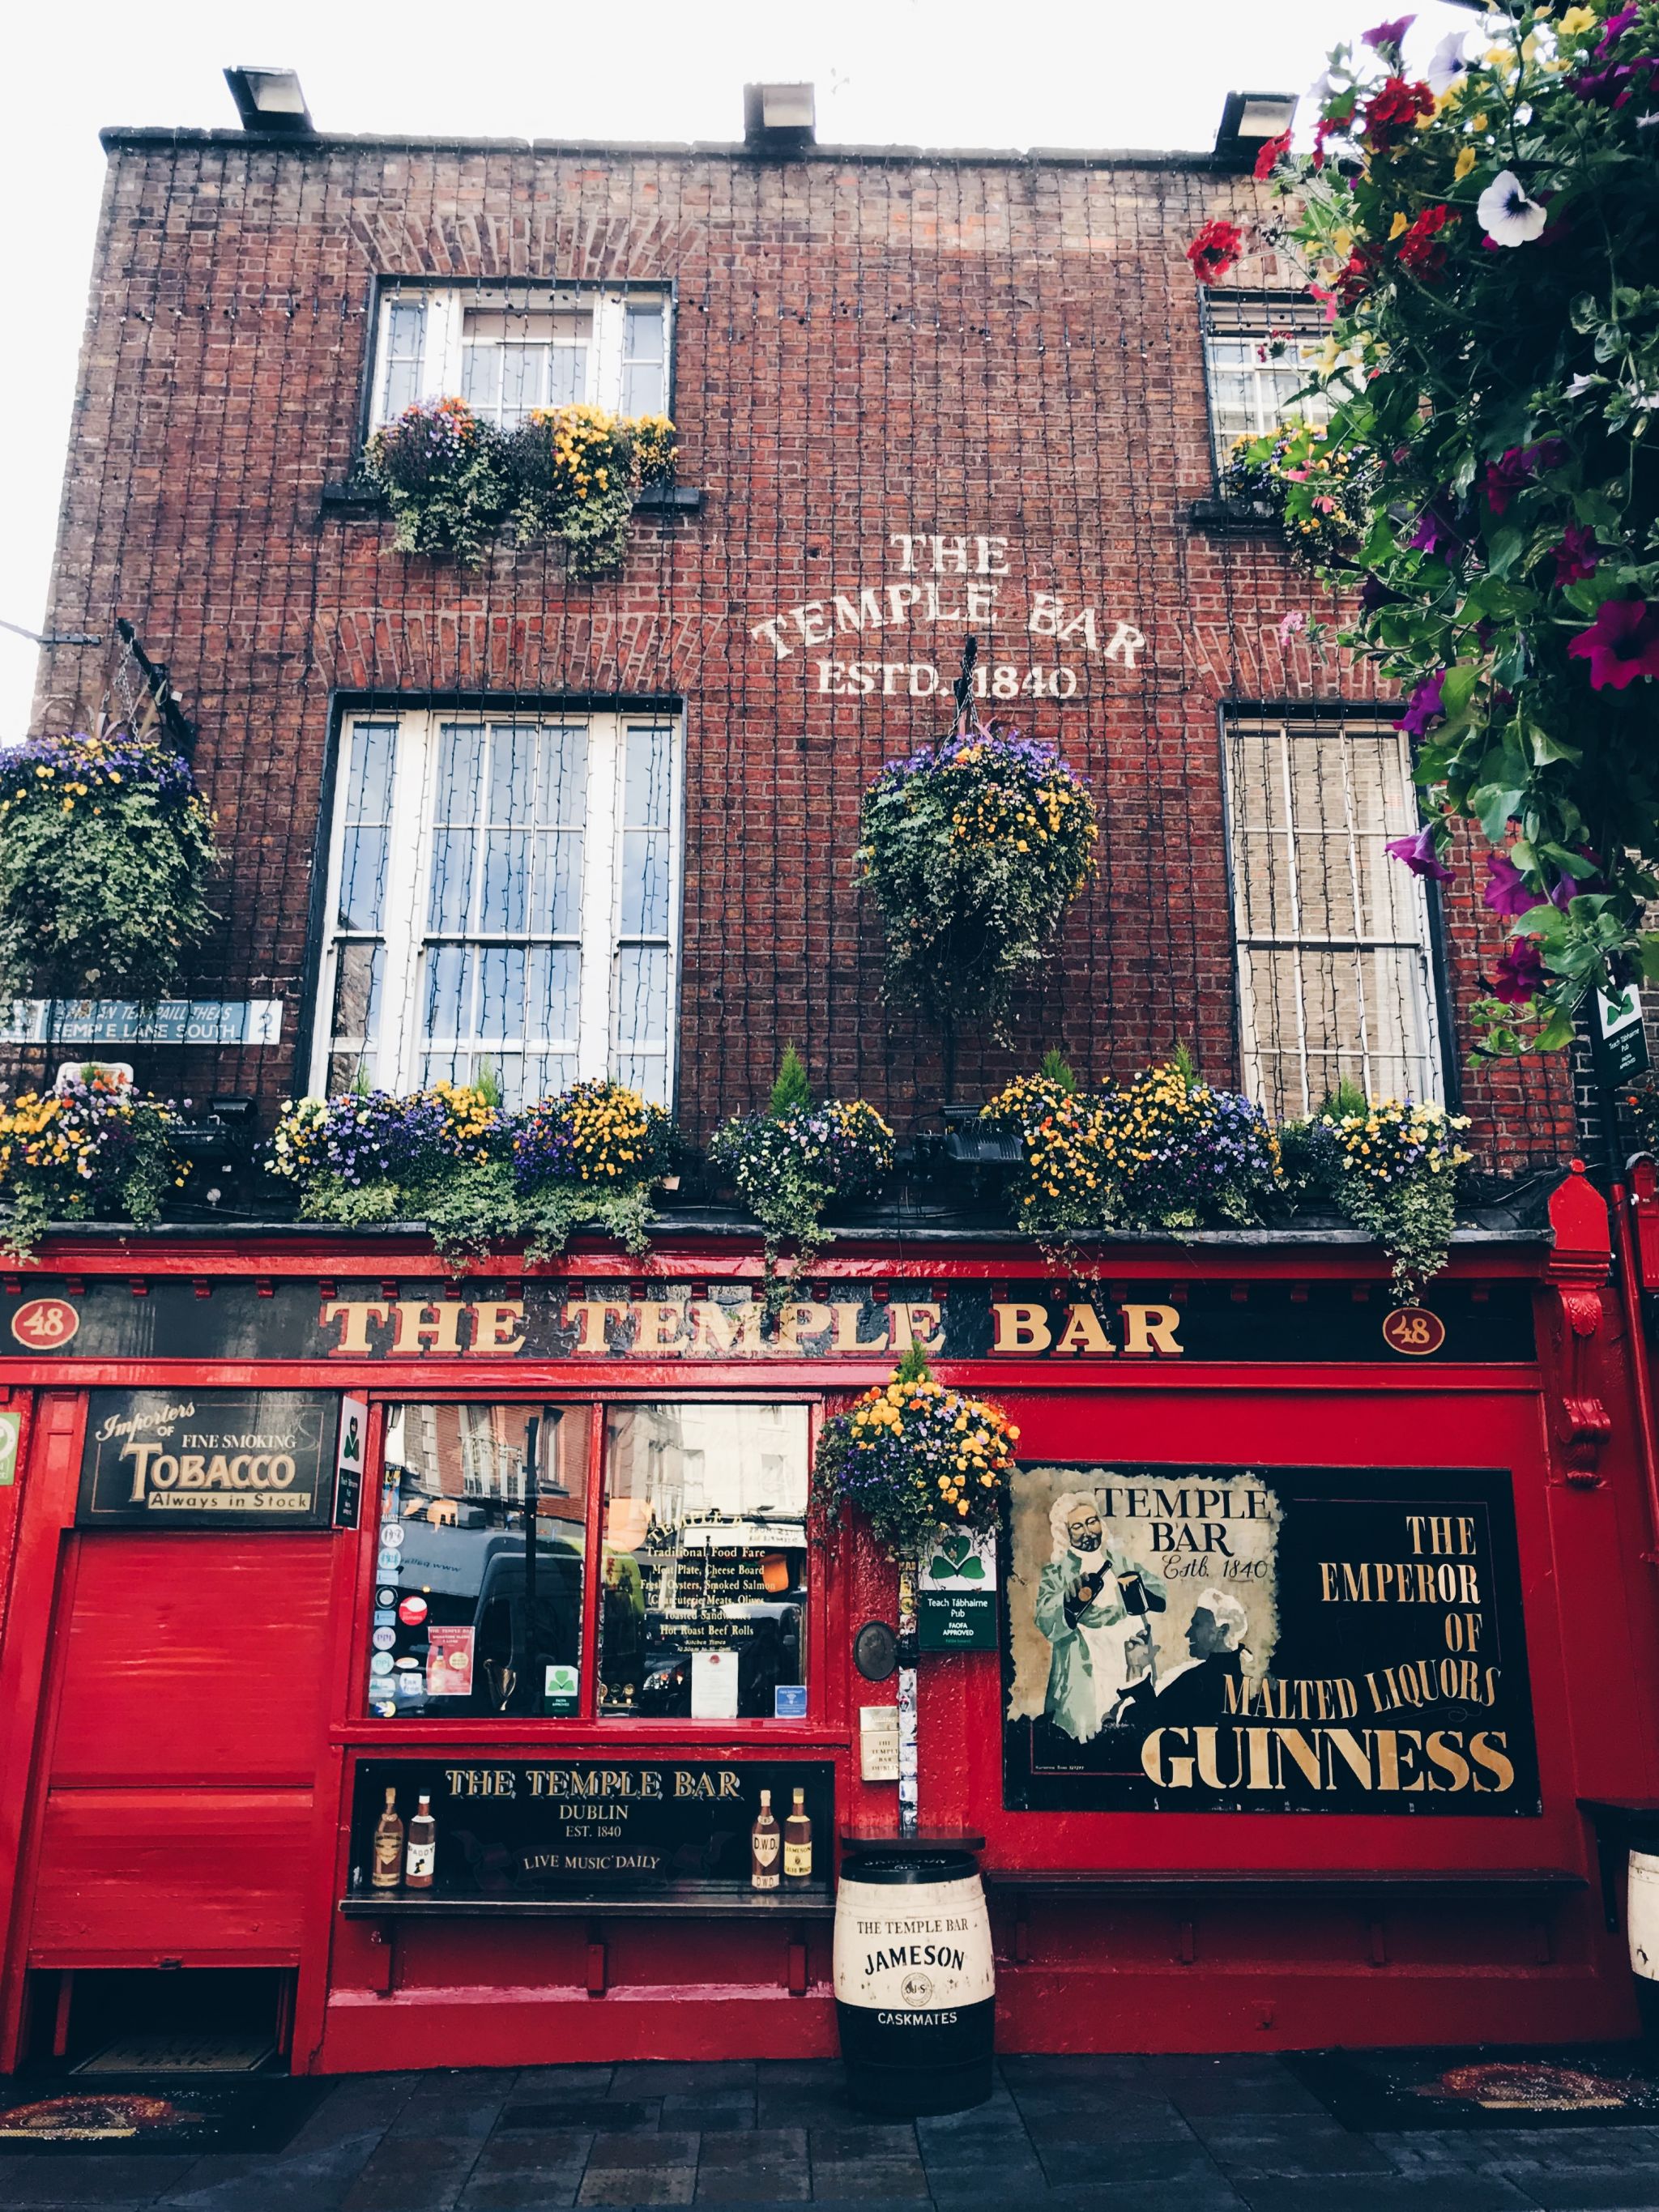 Dublin in a day - Drink at temple bar